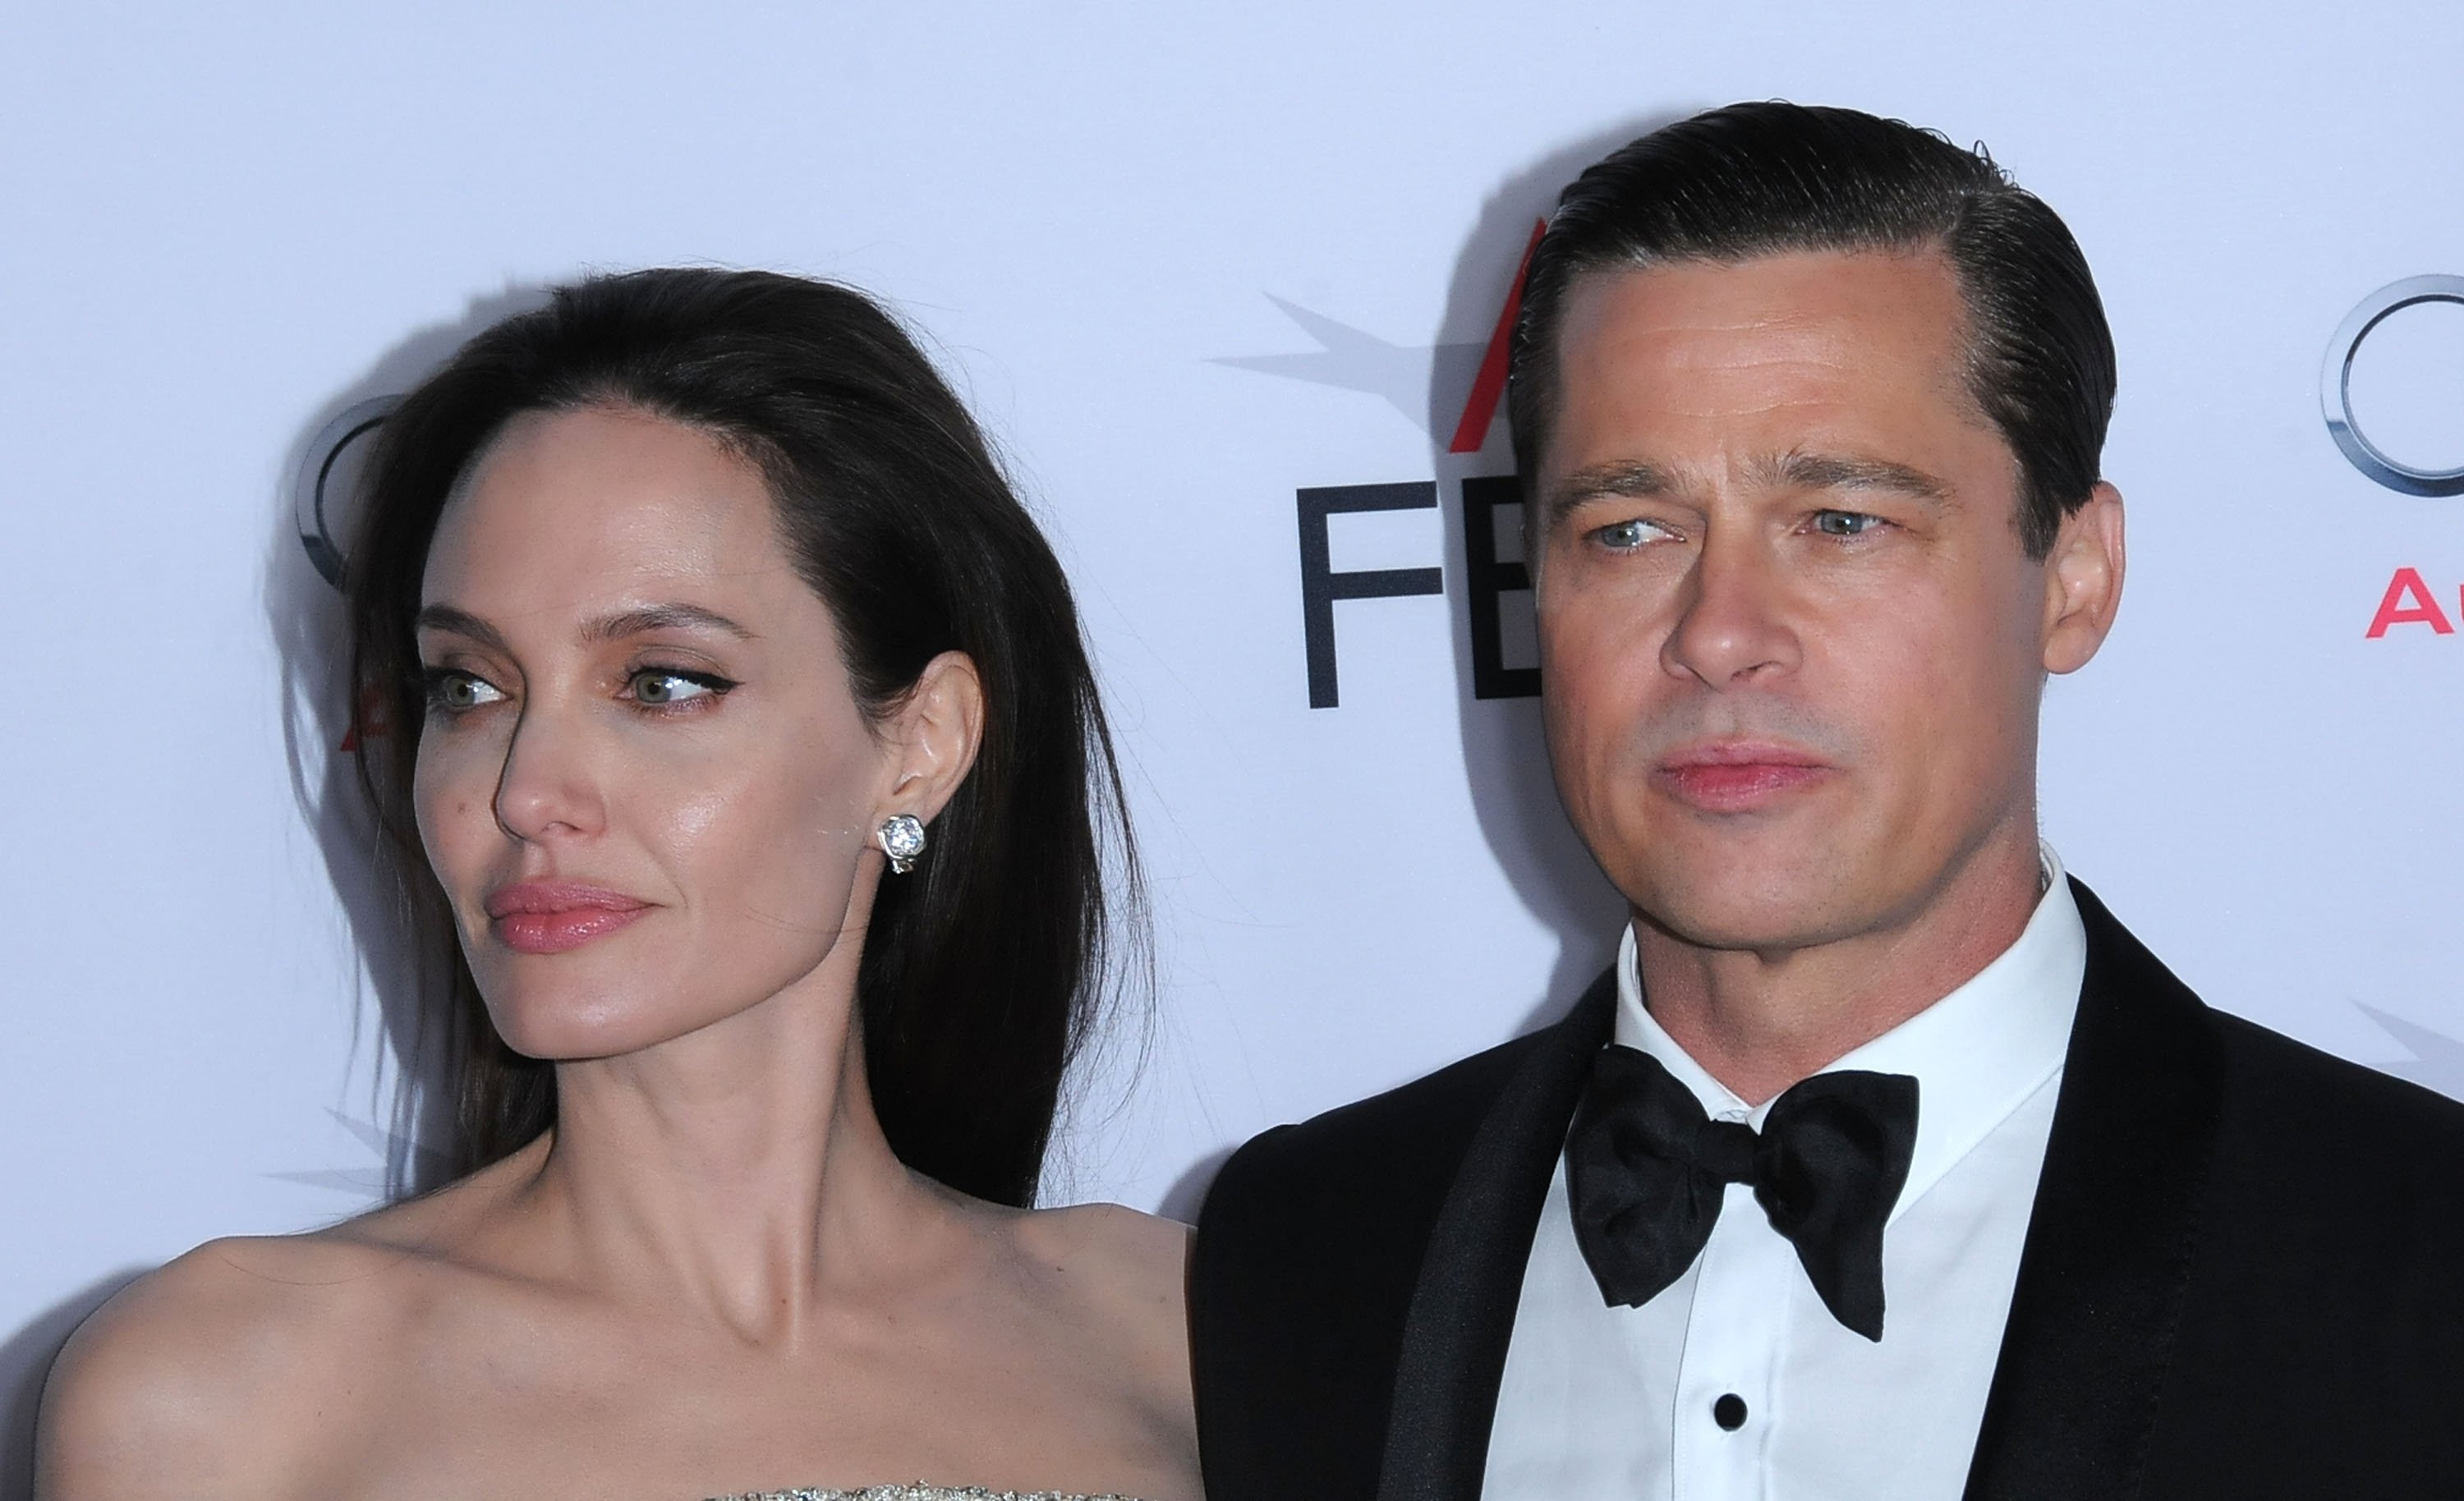  Actress Angelina Jolie and actor Brad Pitt arrive at AFI FEST 2015 Presented By Audi Opening Night Gala Premiere Of Universal Pictures' 'By The Sea' at TCL Chinese 6 Theatres on November 5, 2015 in Hollywood, California. | Source: Getty Images